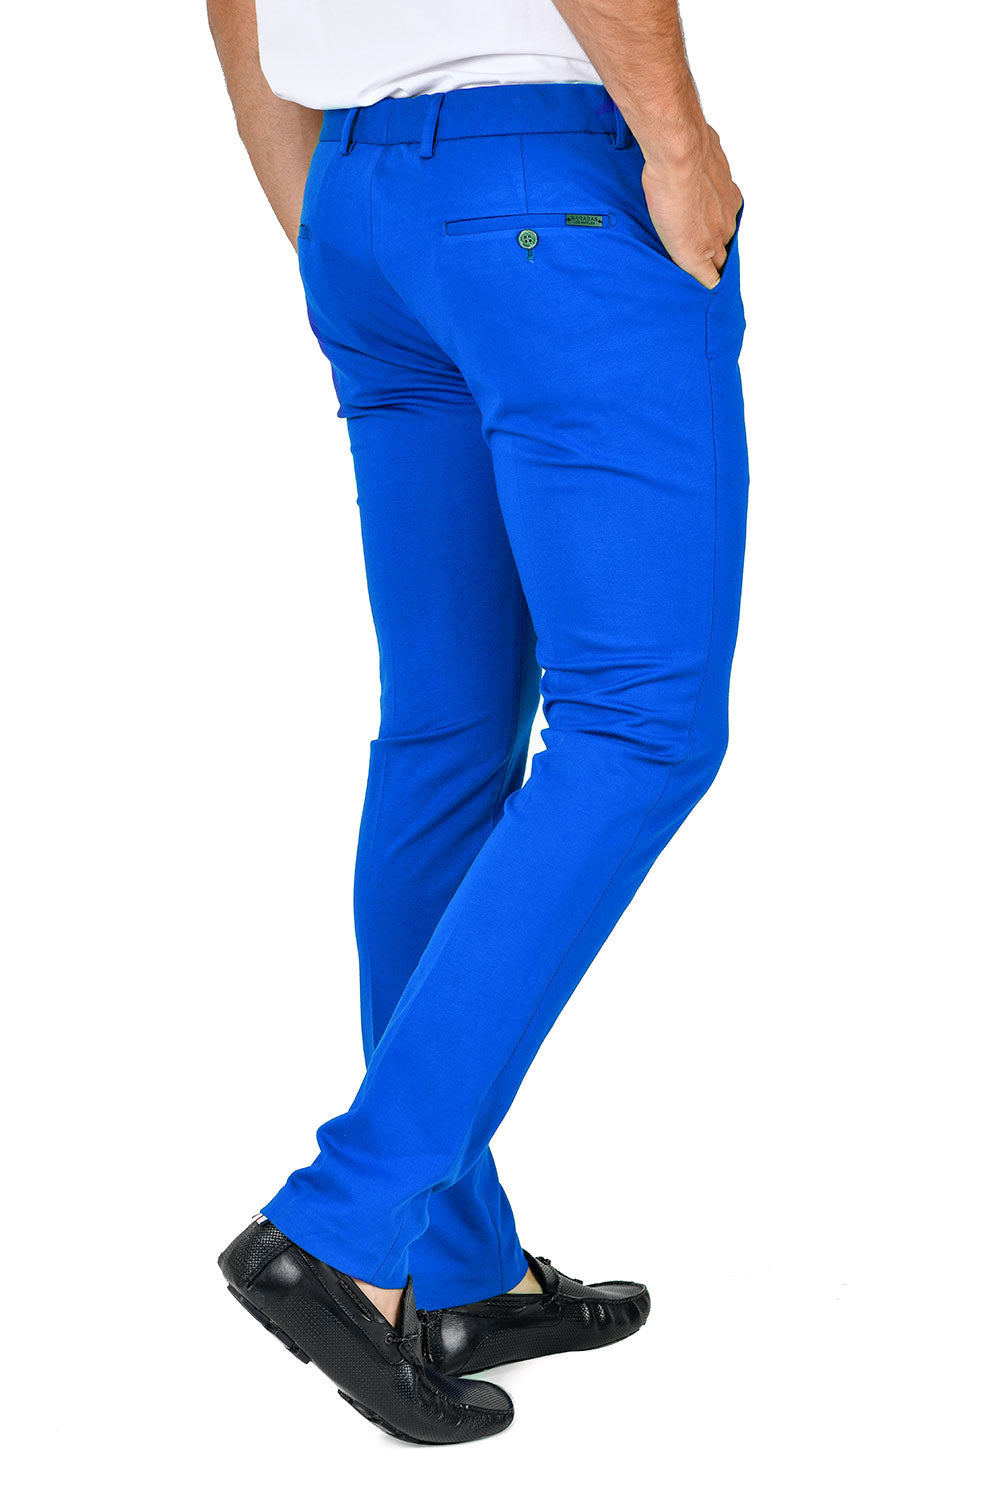 Barabas Men's Solid Color Basic Essential Chino Dress Pants CP4007 True Blue